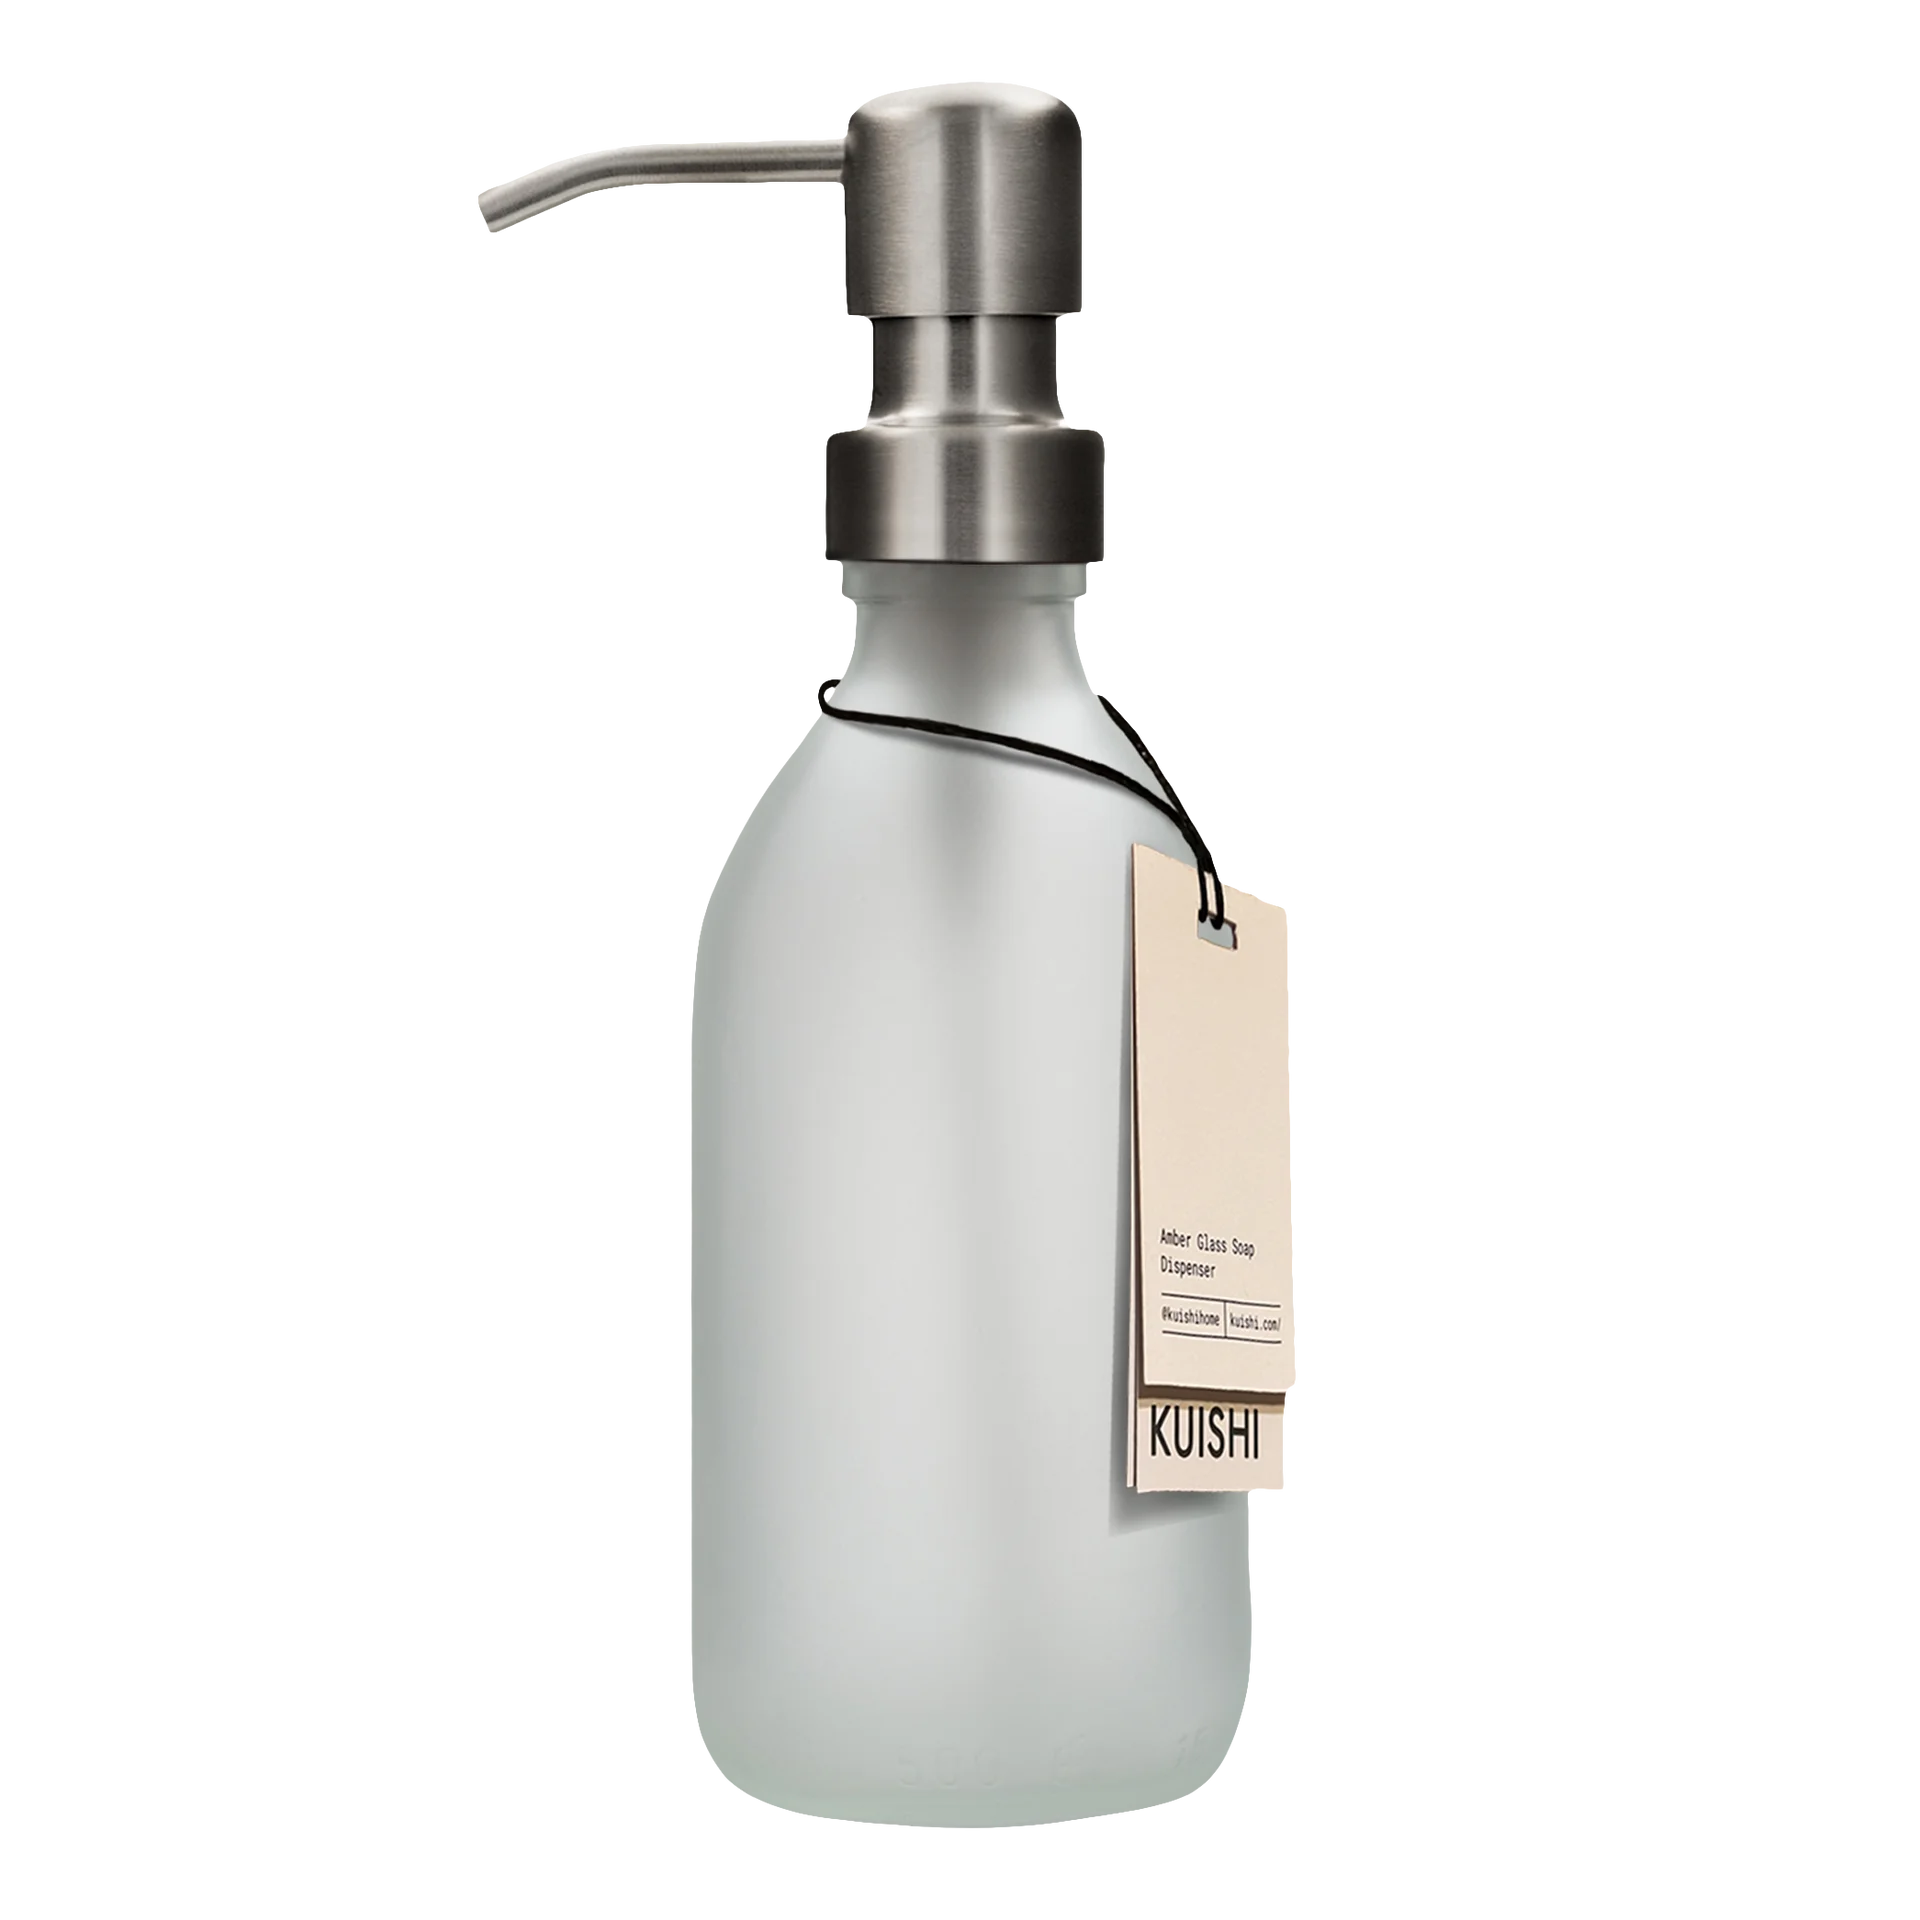 White Frosted Glass Soap Dispenser 250ml Bottle with Silver Pump